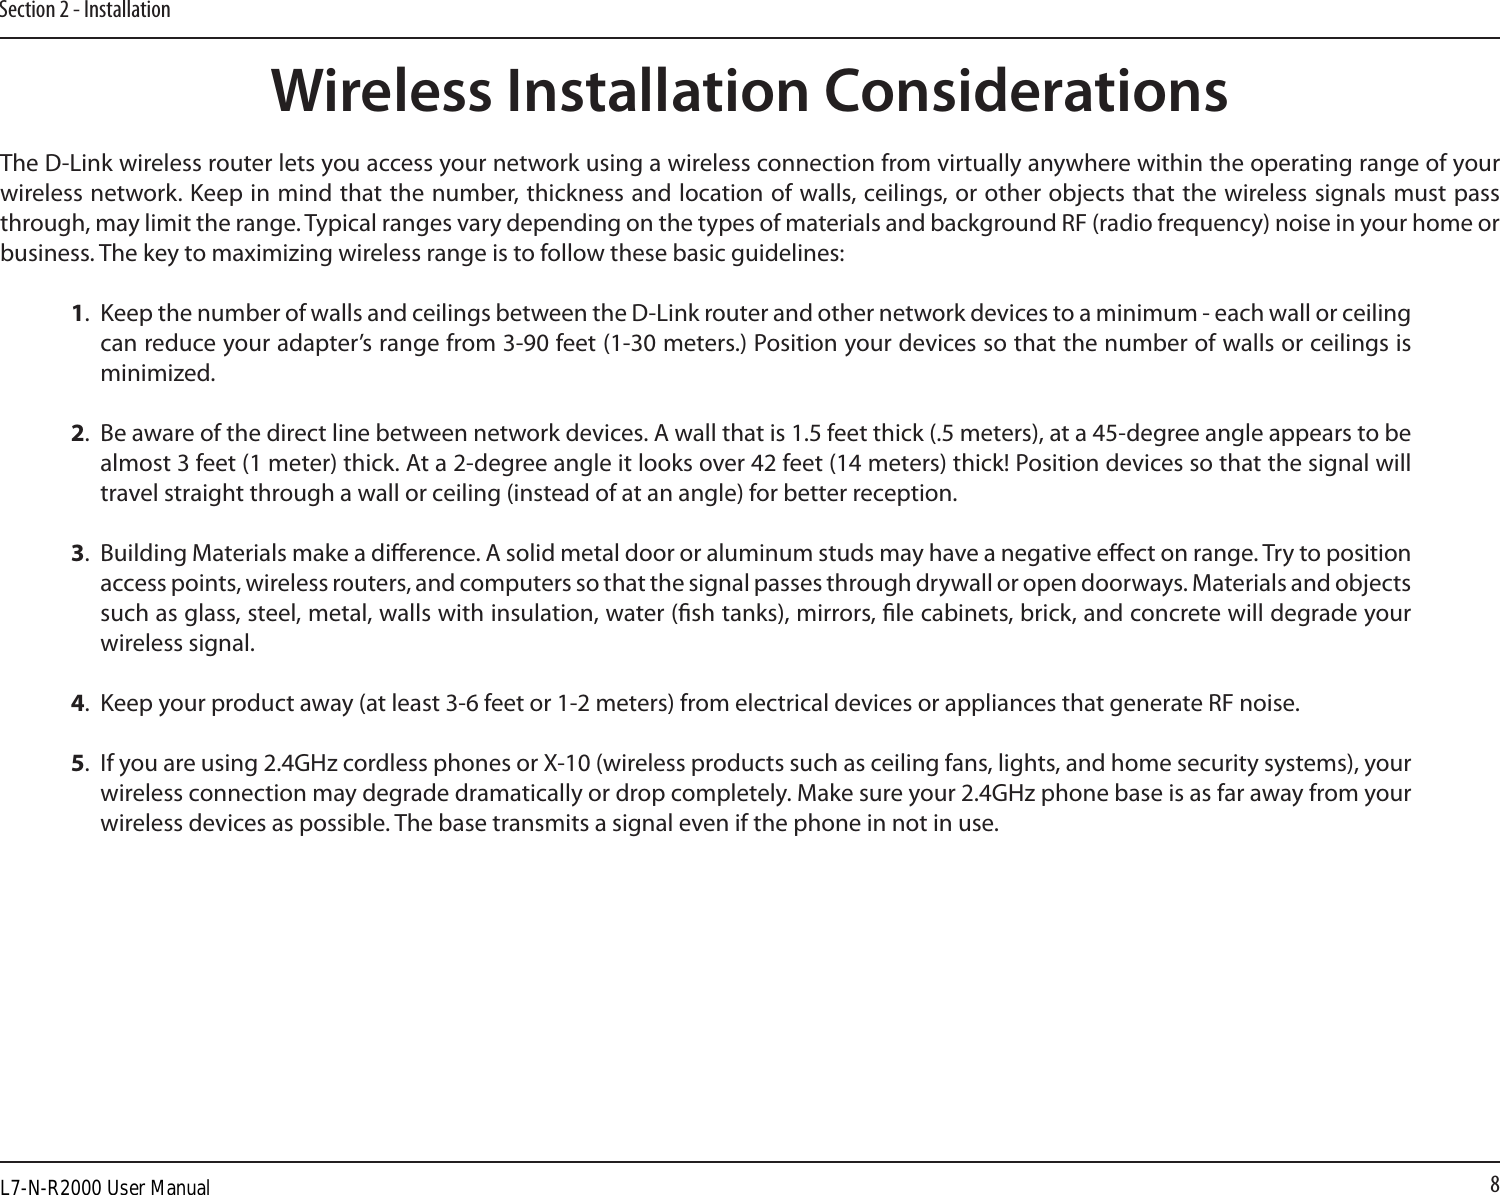 8Section 2 - InstallationWireless Installation ConsiderationsThe D-Link wireless router lets you access your network using a wireless connection from virtually anywhere within the operating range of your wireless network. Keep in mind that the number, thickness and location of walls, ceilings, or other objects that the wireless signals must pass through, may limit the range. Typical ranges vary depending on the types of materials and background RF (radio frequency) noise in your home or business. The key to maximizing wireless range is to follow these basic guidelines:1.  Keep the number of walls and ceilings between the D-Link router and other network devices to a minimum - each wall or ceiling can reduce your adapter’s range from 3-90 feet (1-30 meters.) Position your devices so that the number of walls or ceilings is minimized.2.  Be aware of the direct line between network devices. A wall that is 1.5 feet thick (.5 meters), at a 45-degree angle appears to be almost 3 feet (1 meter) thick. At a 2-degree angle it looks over 42 feet (14 meters) thick! Position devices so that the signal will travel straight through a wall or ceiling (instead of at an angle) for better reception.3.  Building Materials make a dierence. A solid metal door or aluminum studs may have a negative eect on range. Try to position access points, wireless routers, and computers so that the signal passes through drywall or open doorways. Materials and objects such as glass, steel, metal, walls with insulation, water (sh tanks), mirrors, le cabinets, brick, and concrete will degrade your wireless signal.4.  Keep your product away (at least 3-6 feet or 1-2 meters) from electrical devices or appliances that generate RF noise.5.  If you are using 2.4GHz cordless phones or X-10 (wireless products such as ceiling fans, lights, and home security systems), your wireless connection may degrade dramatically or drop completely. Make sure your 2.4GHz phone base is as far away from your wireless devices as possible. The base transmits a signal even if the phone in not in use.L7-N-R2000 User Manual